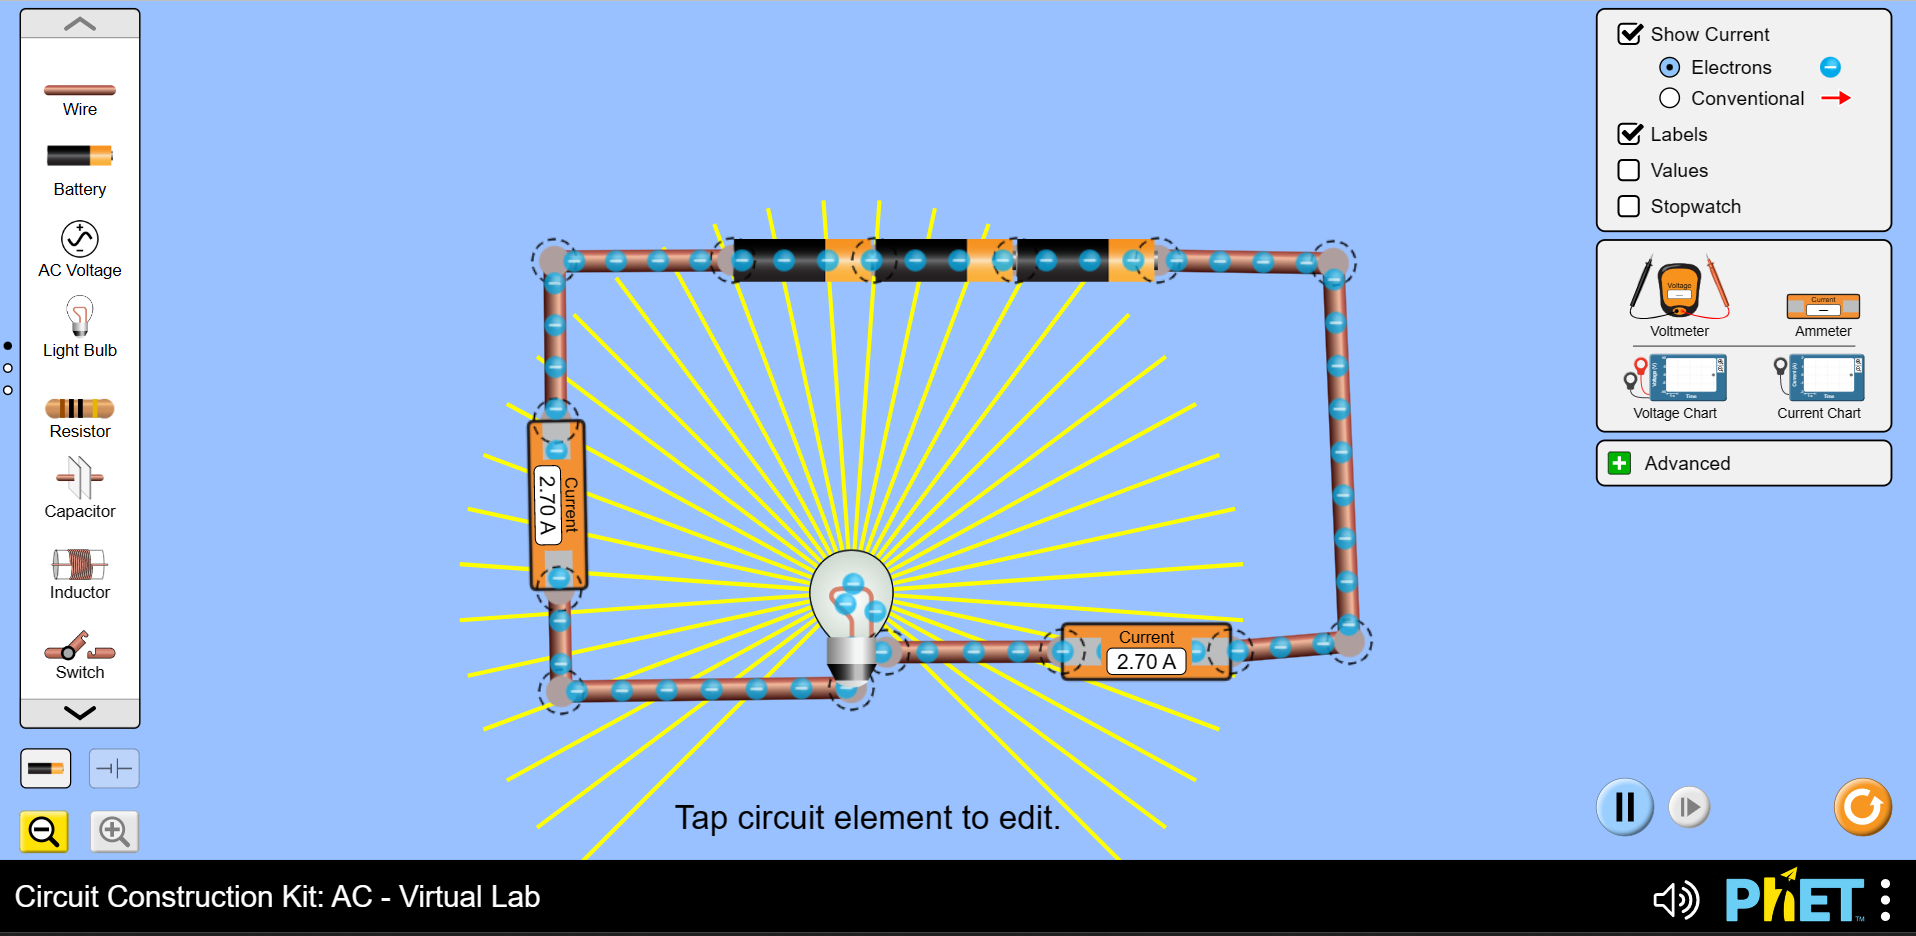 Screenshot of Phet simulation of measuring current in a circuit.